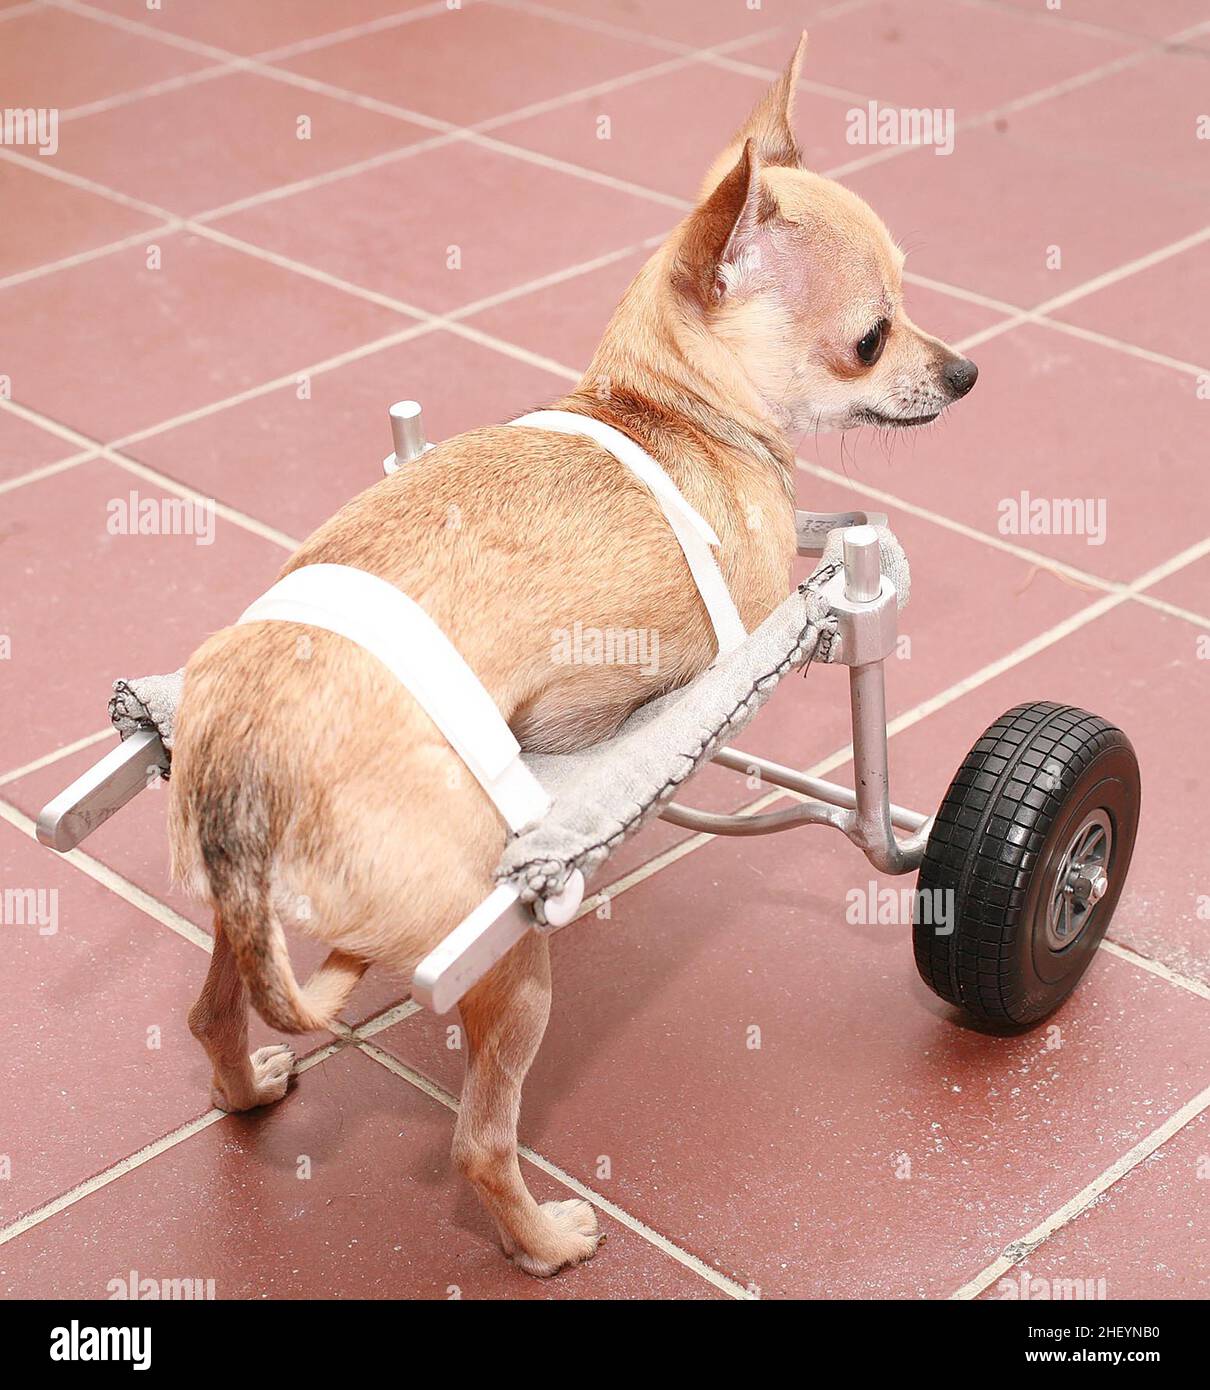 ONE CHIHUAHUA PUP WHO WAS BORN WITHOUT FRONT LEGS, ON SPECIALLY DESIGNED WHEELS.  THE WORLD'S FIRST FOUR CHIHUAHUA DOGS BORN WITHOUT FRONT LEGS HAVE LEARNT TO USE THEIR SPECIALLY ADAPTED WHEELS TO GET AROUND. NEW YORK, USA.  PICTURE: GARY ROBERTS Stock Photo